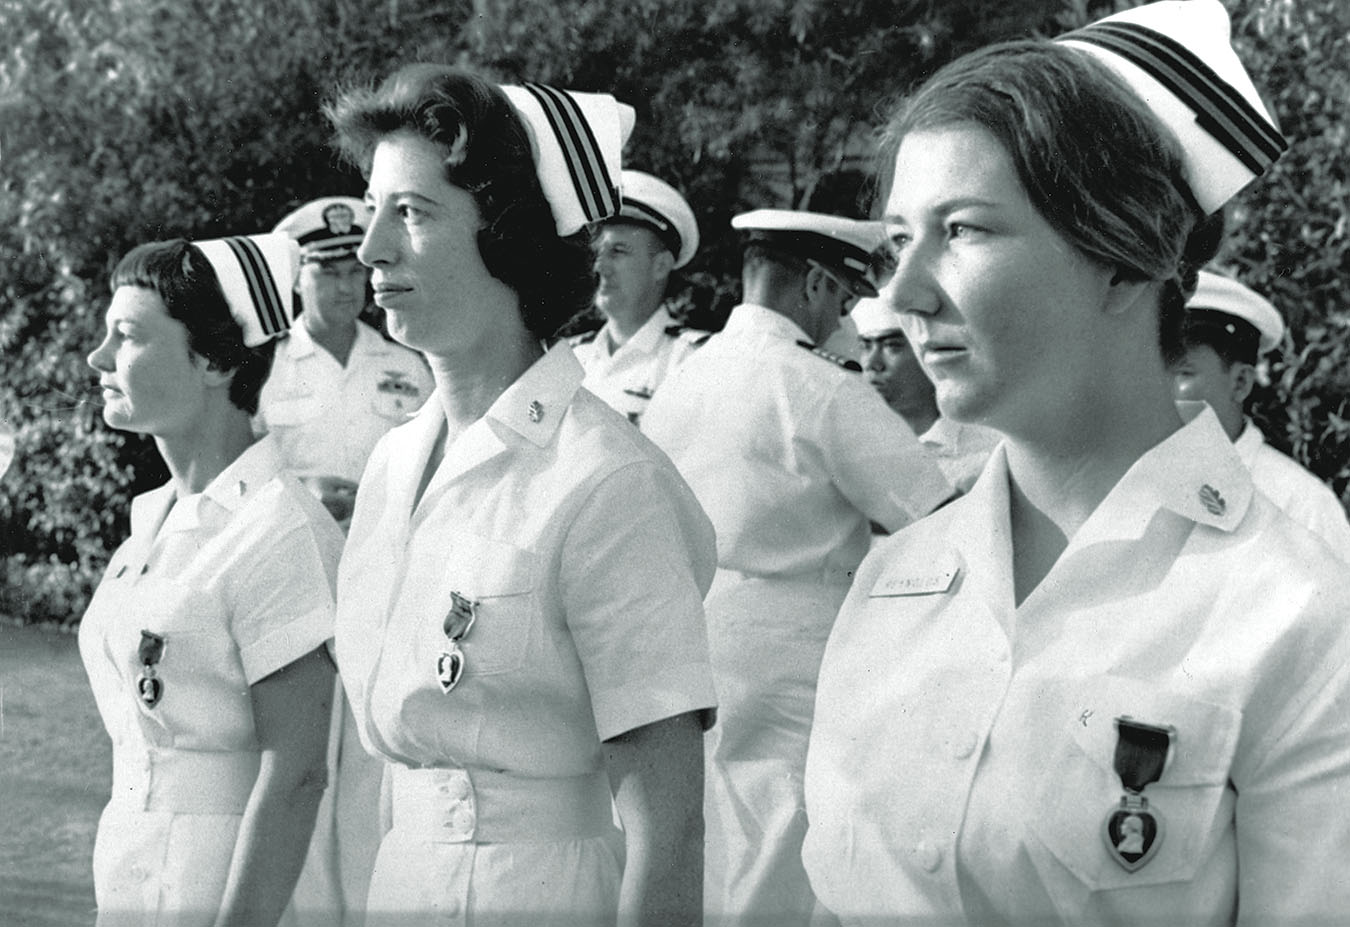 Three of four Navy nurses wounded during the 1964 bombing are decorated with the Purple Heart on Jan. 8, 1965, the first women to receive the award in Vietnam. From left: Lt. Barbara Wooster, Lt. Ruth Ann Mason, Lt.j.g. Ann Darby Reynolds. / AP